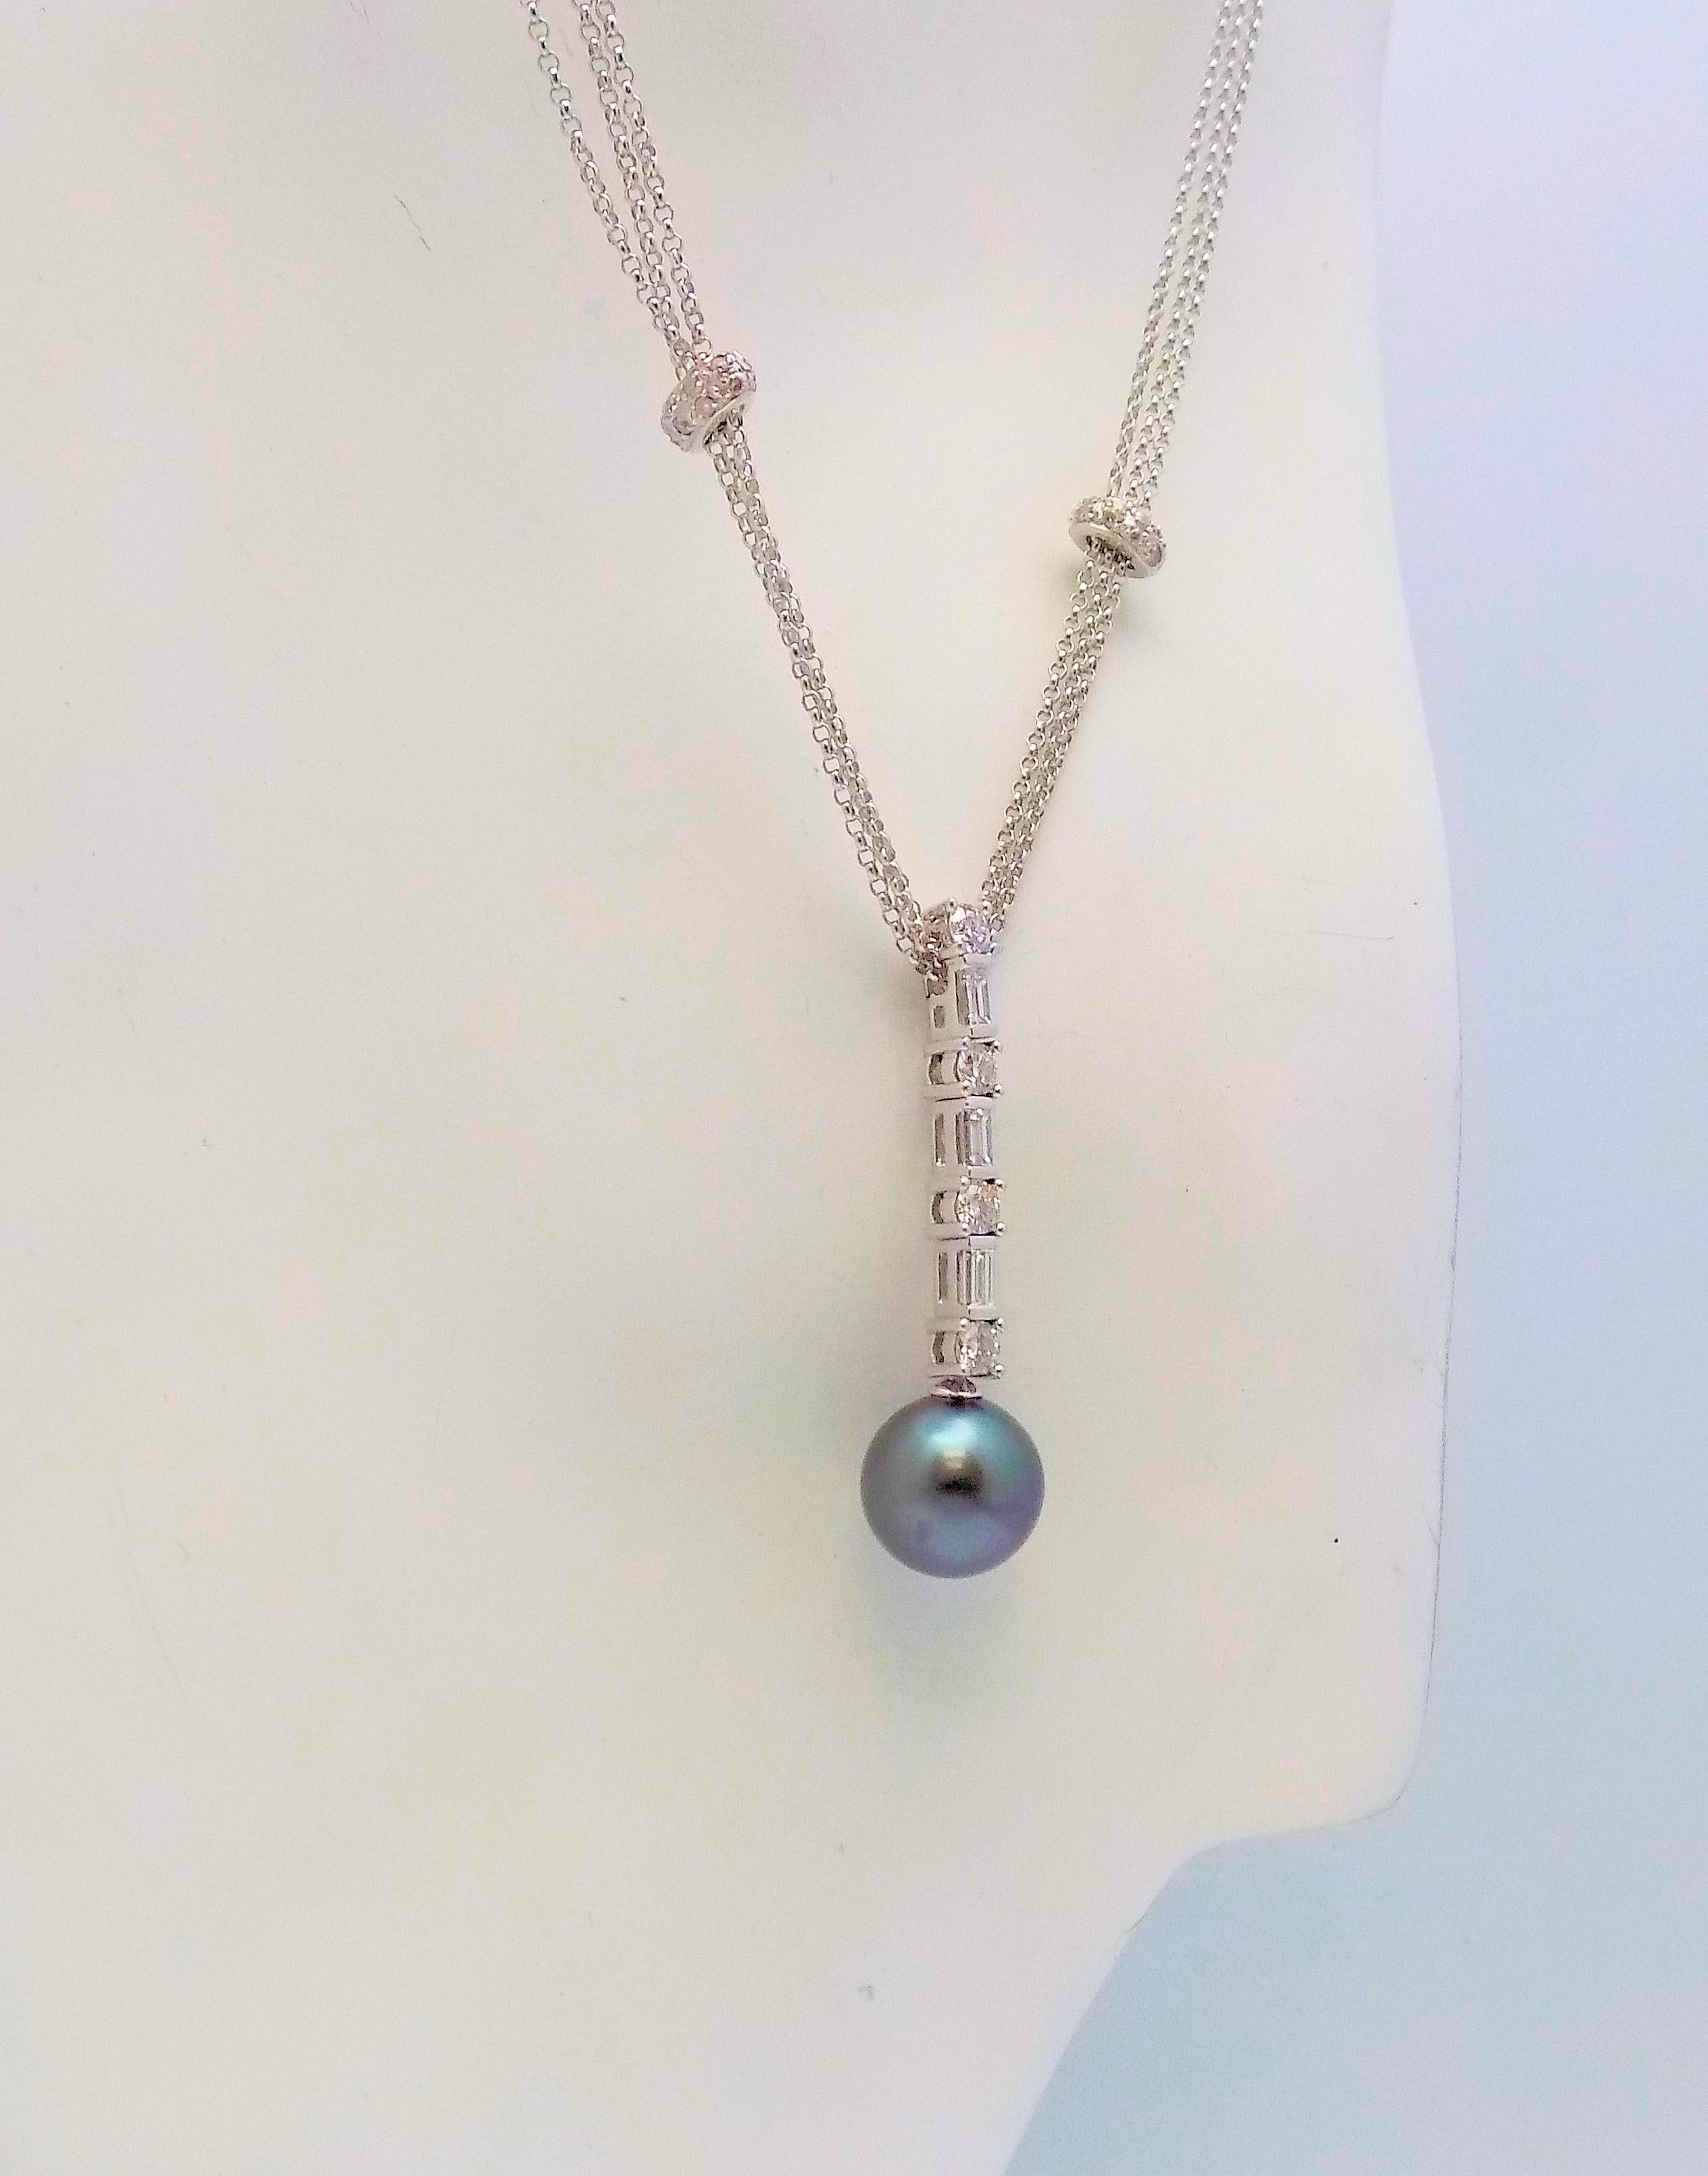 Gorgeous 14 Karat White Gold Triple Strand Necklace featuring (1) 10 MM Round Tahitian Cultured Pearl, 4 Round Brilliant Diamonds, 3 Baguette Cut Diamonds 0.62 Carat Total Weight, VS-SI, G-H; on 18